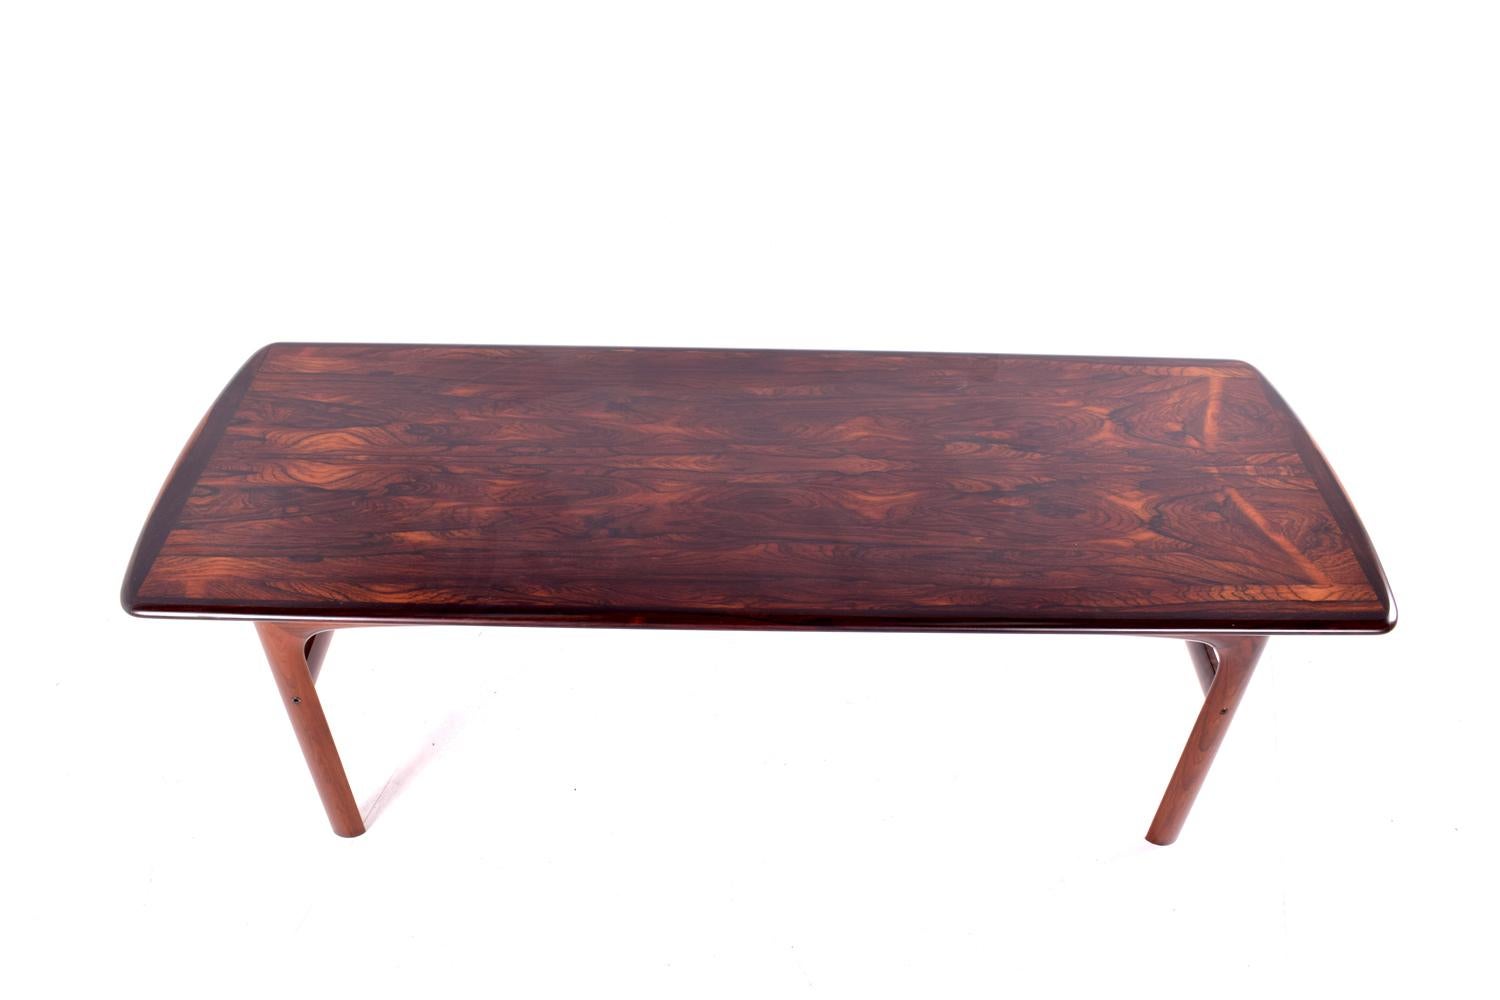 Mid-Century Modern coffee table manufactured by Westnofa of Norway. Table top features gorgeous rosewood grains wrapped with solid wood edge banding.
A delicate design with a very good construction and attention to details by Rasmus Solberg.